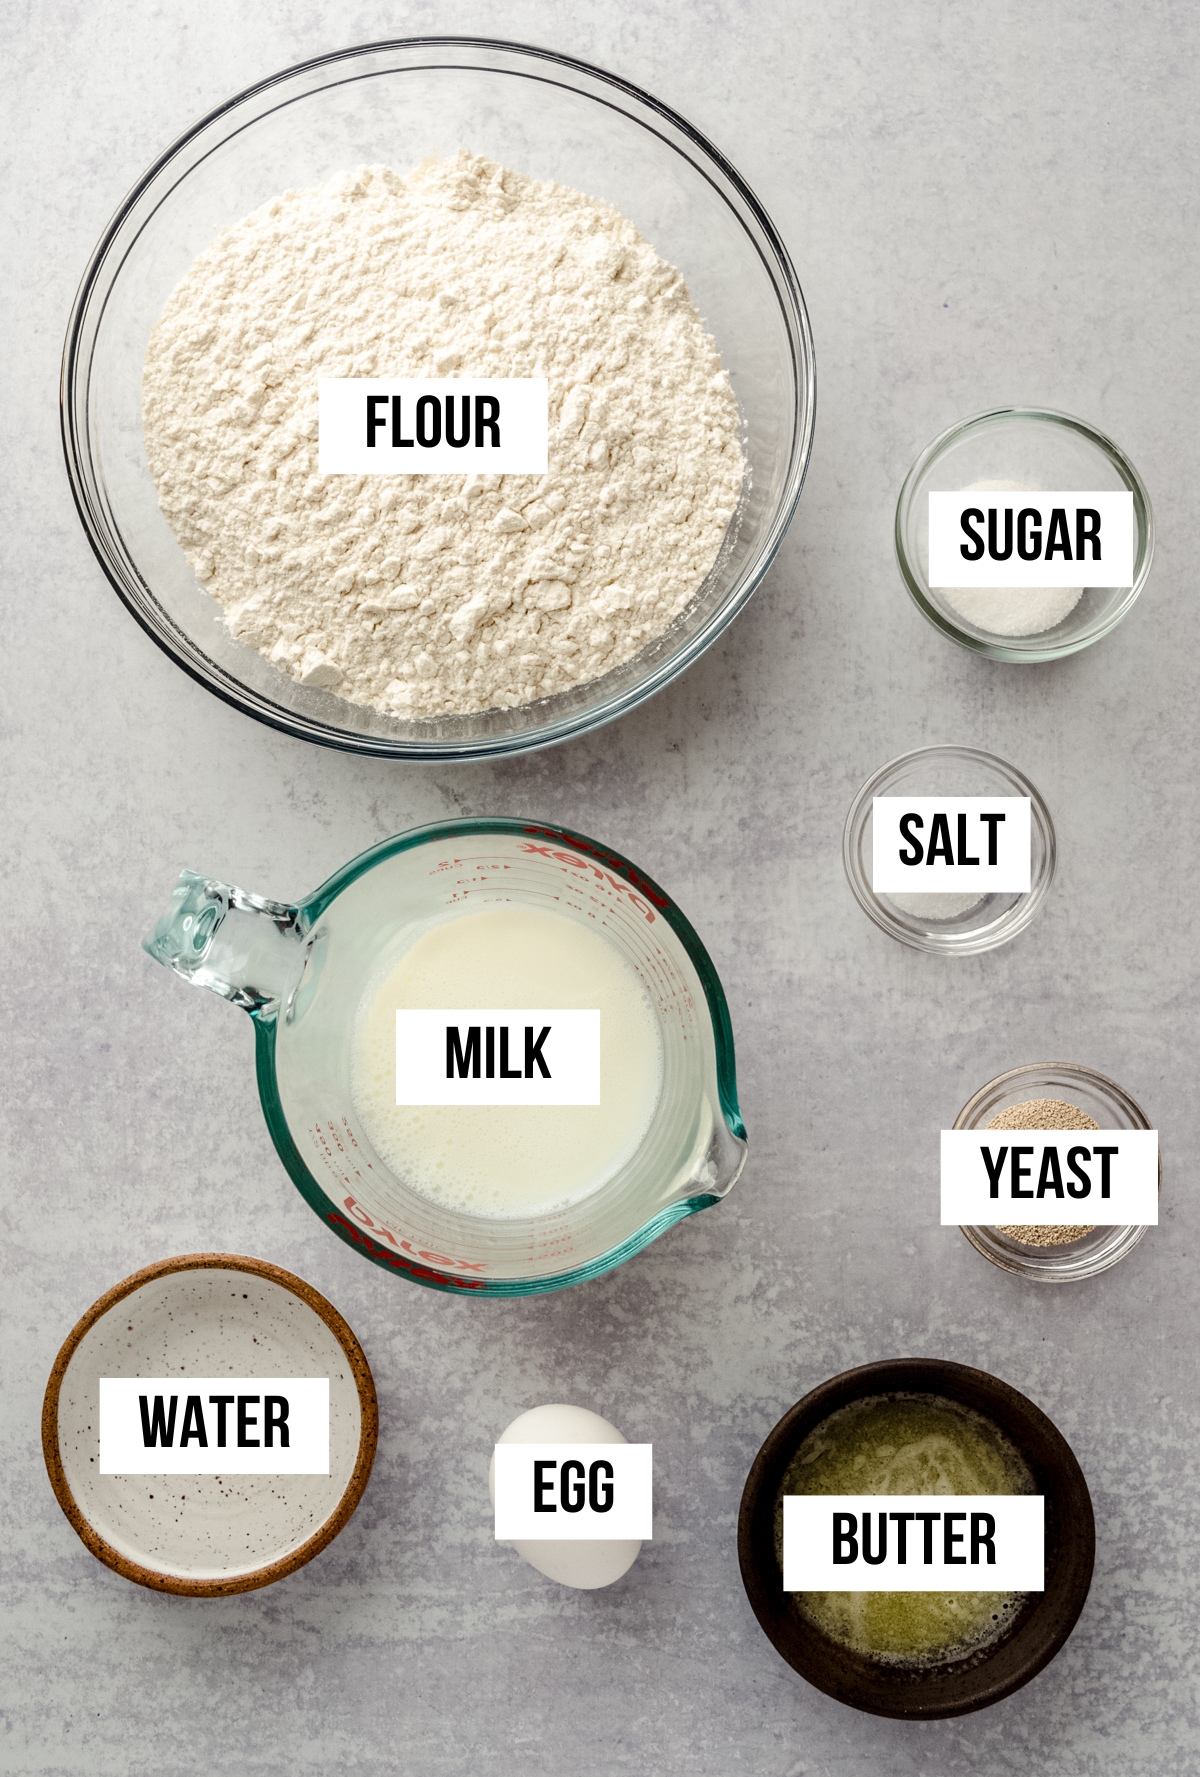 Aerial photo of ingredients for homemade hot dog buns with text overlay labeling each ingredient.